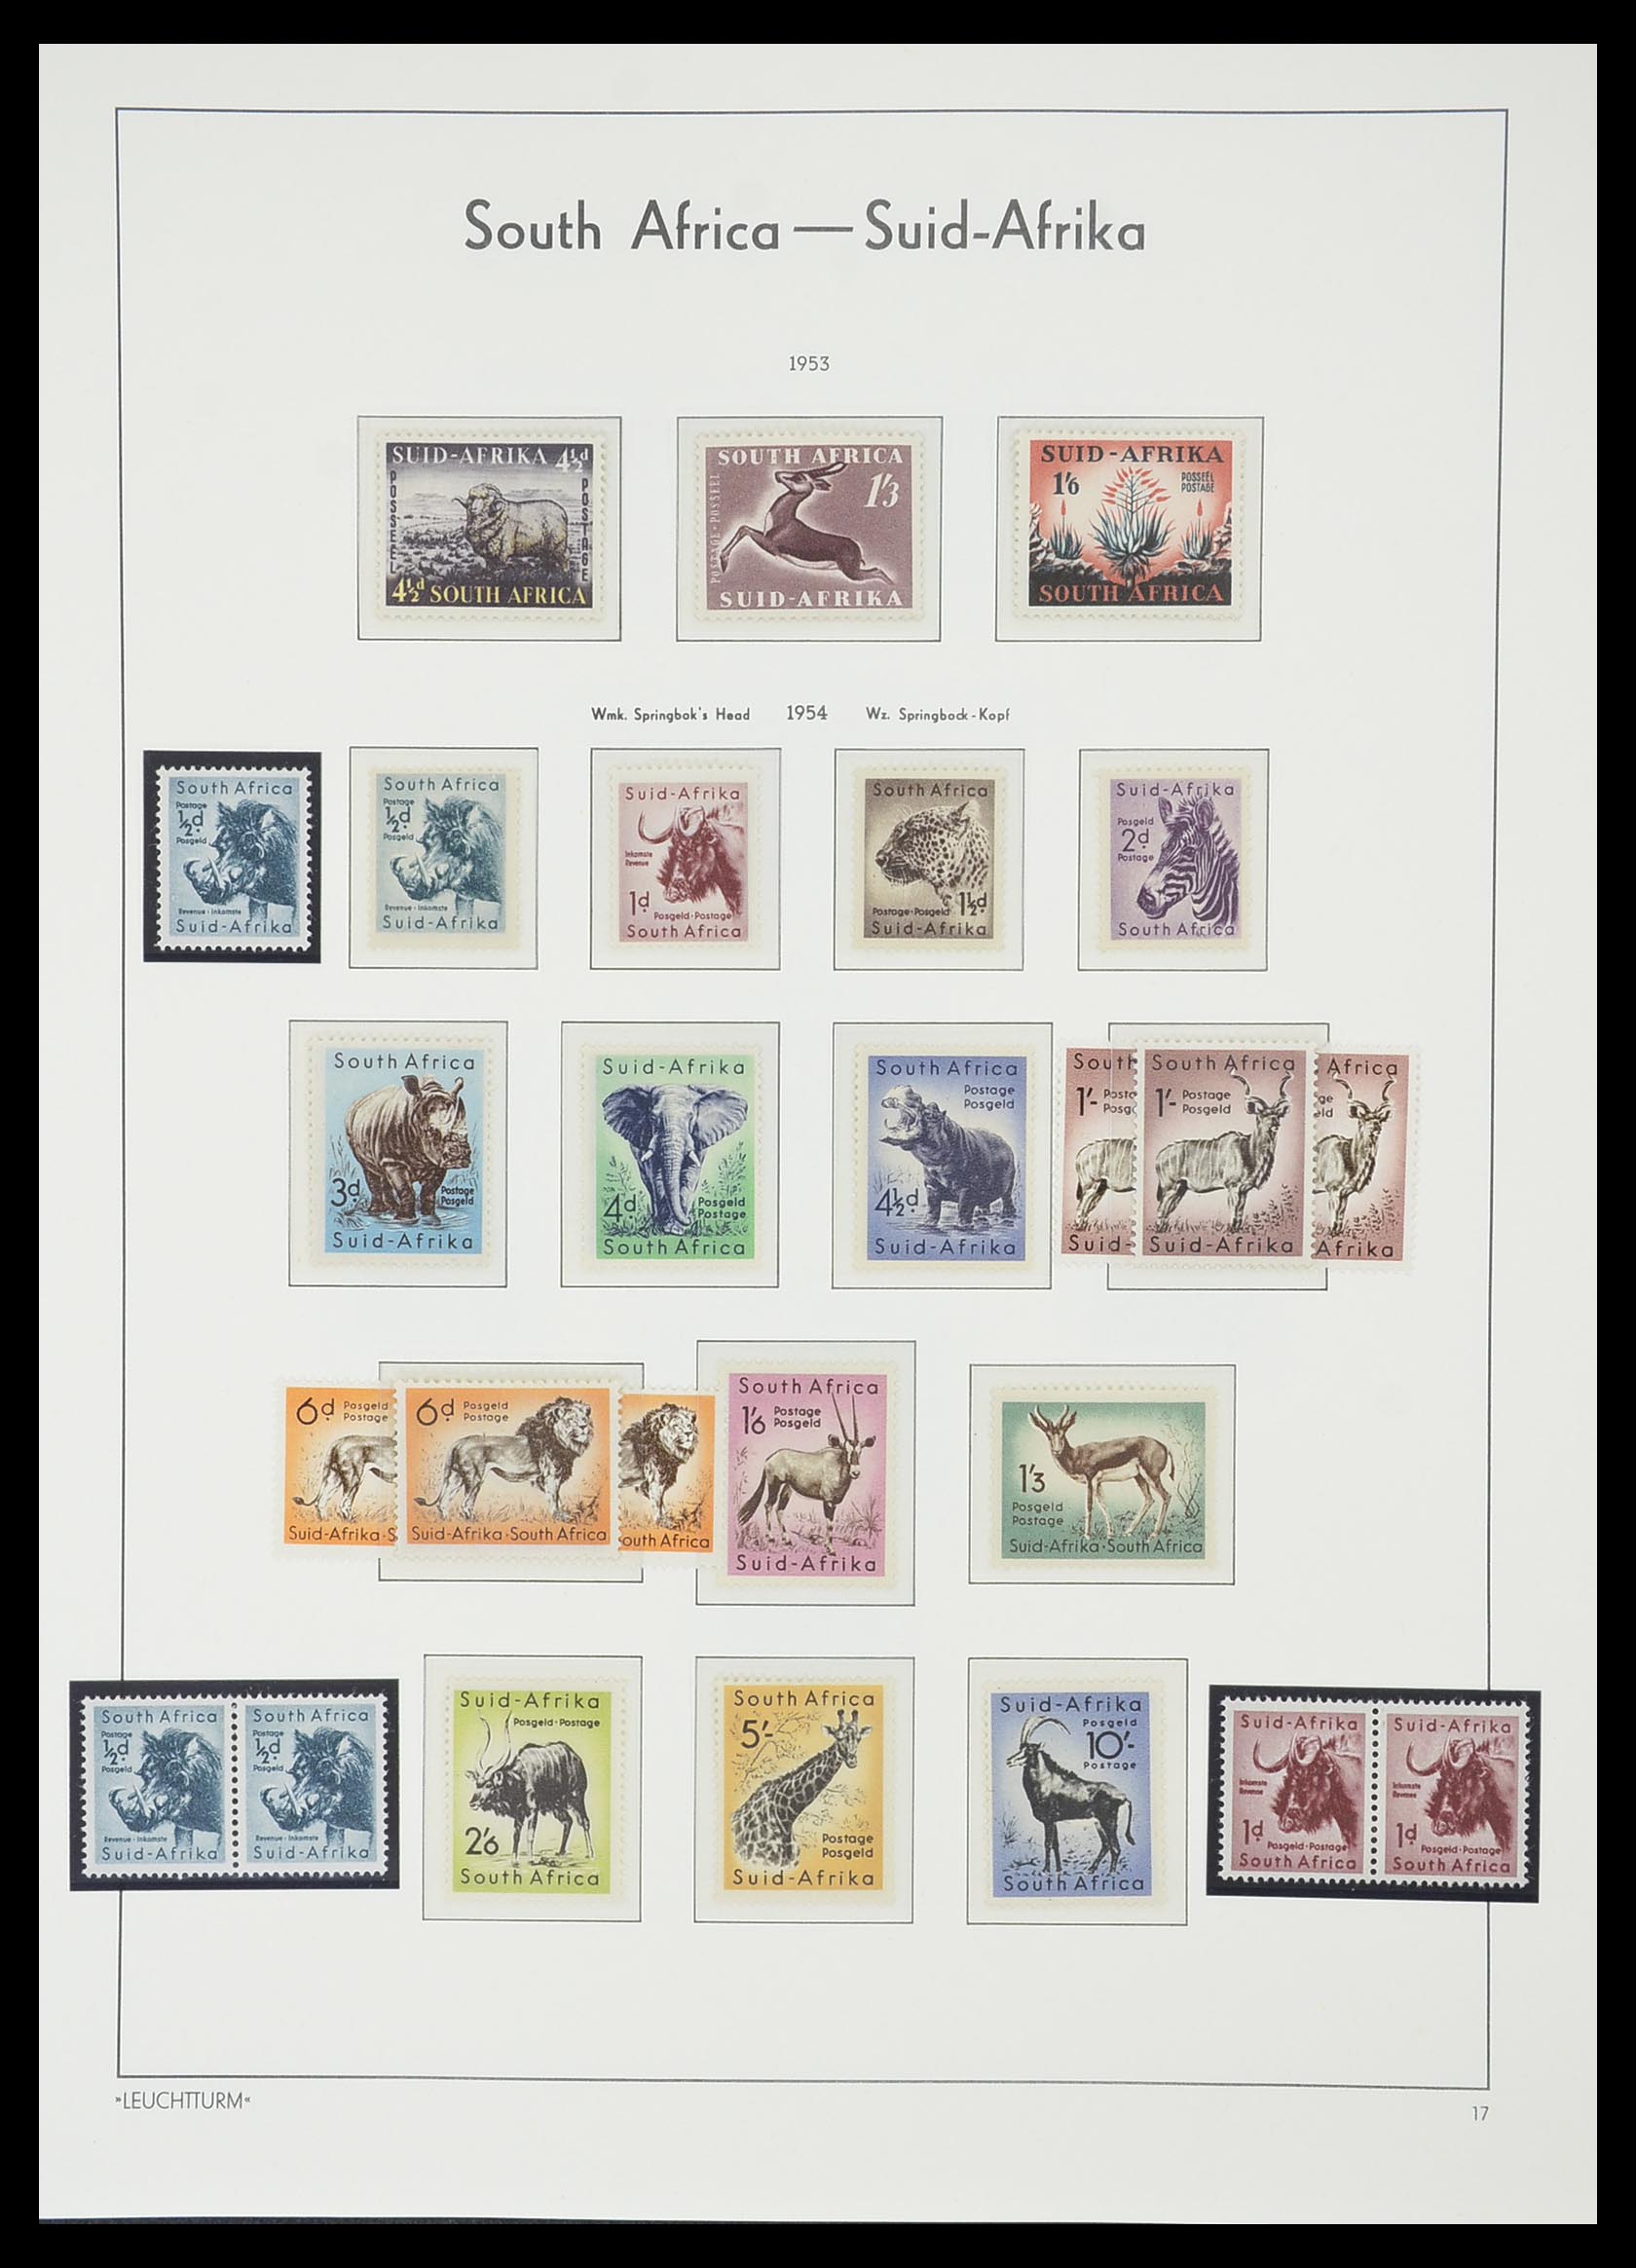 33432 024 - Stamp collection 33432 South Africa 1910-2001.